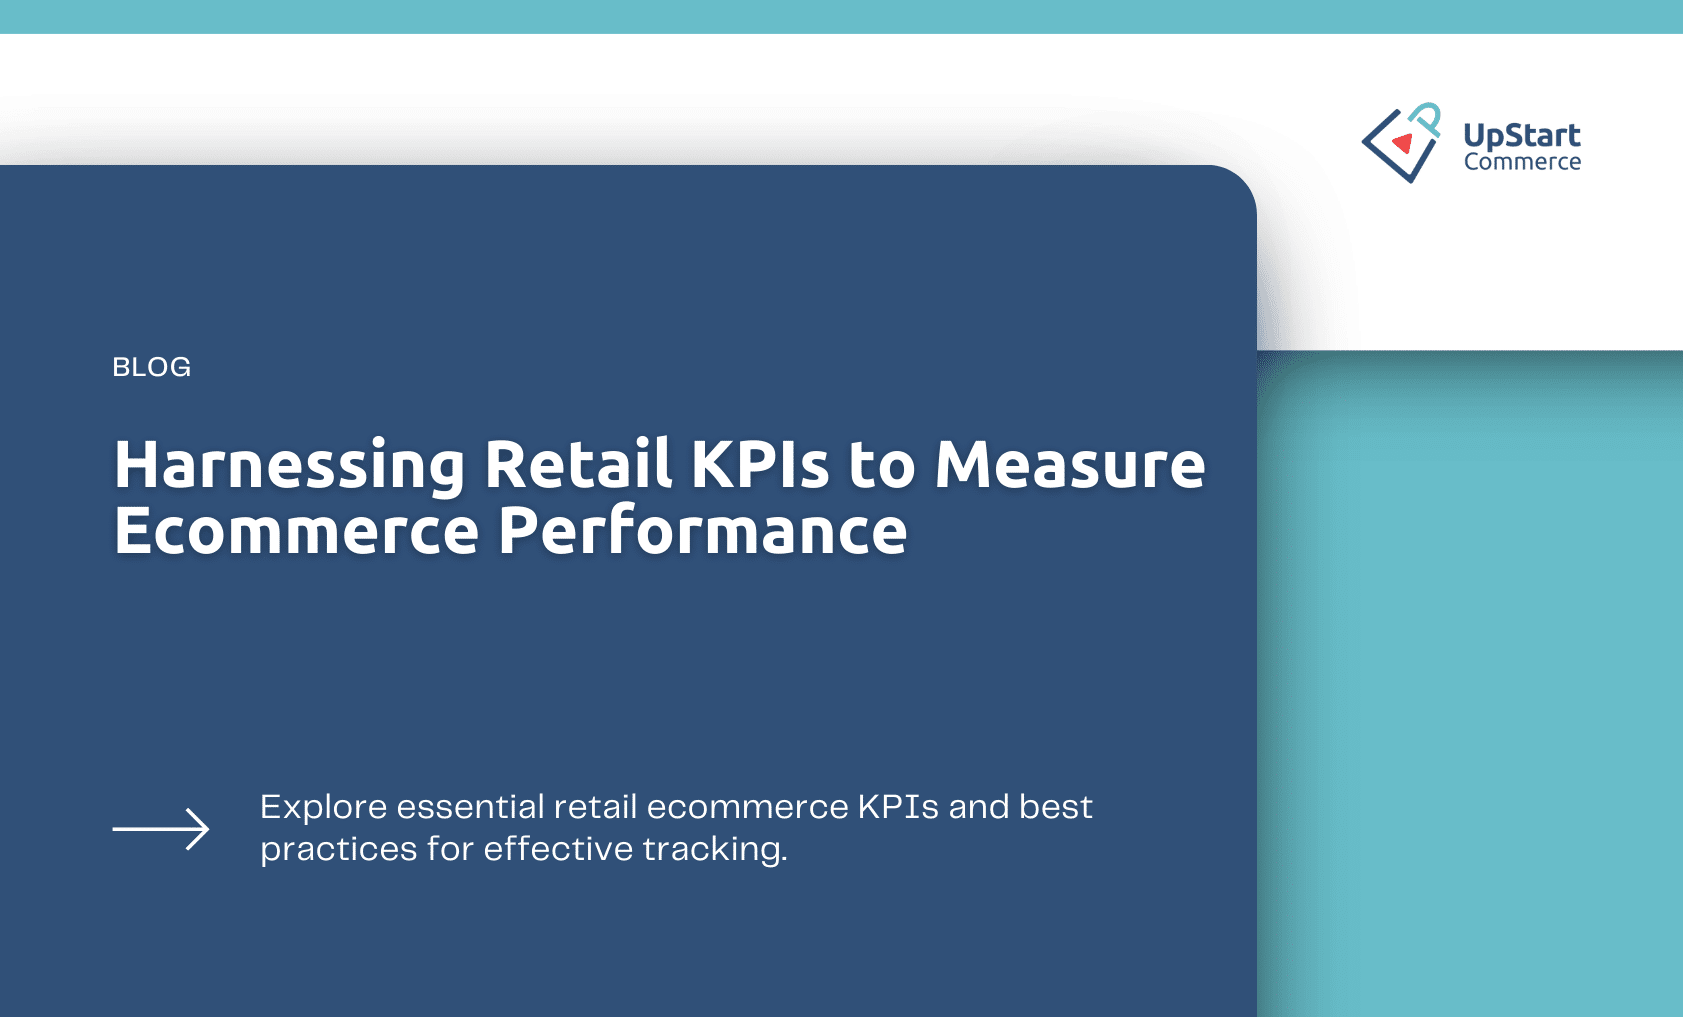 Harnessing Retail KPIs to Measure Ecommerce Performance